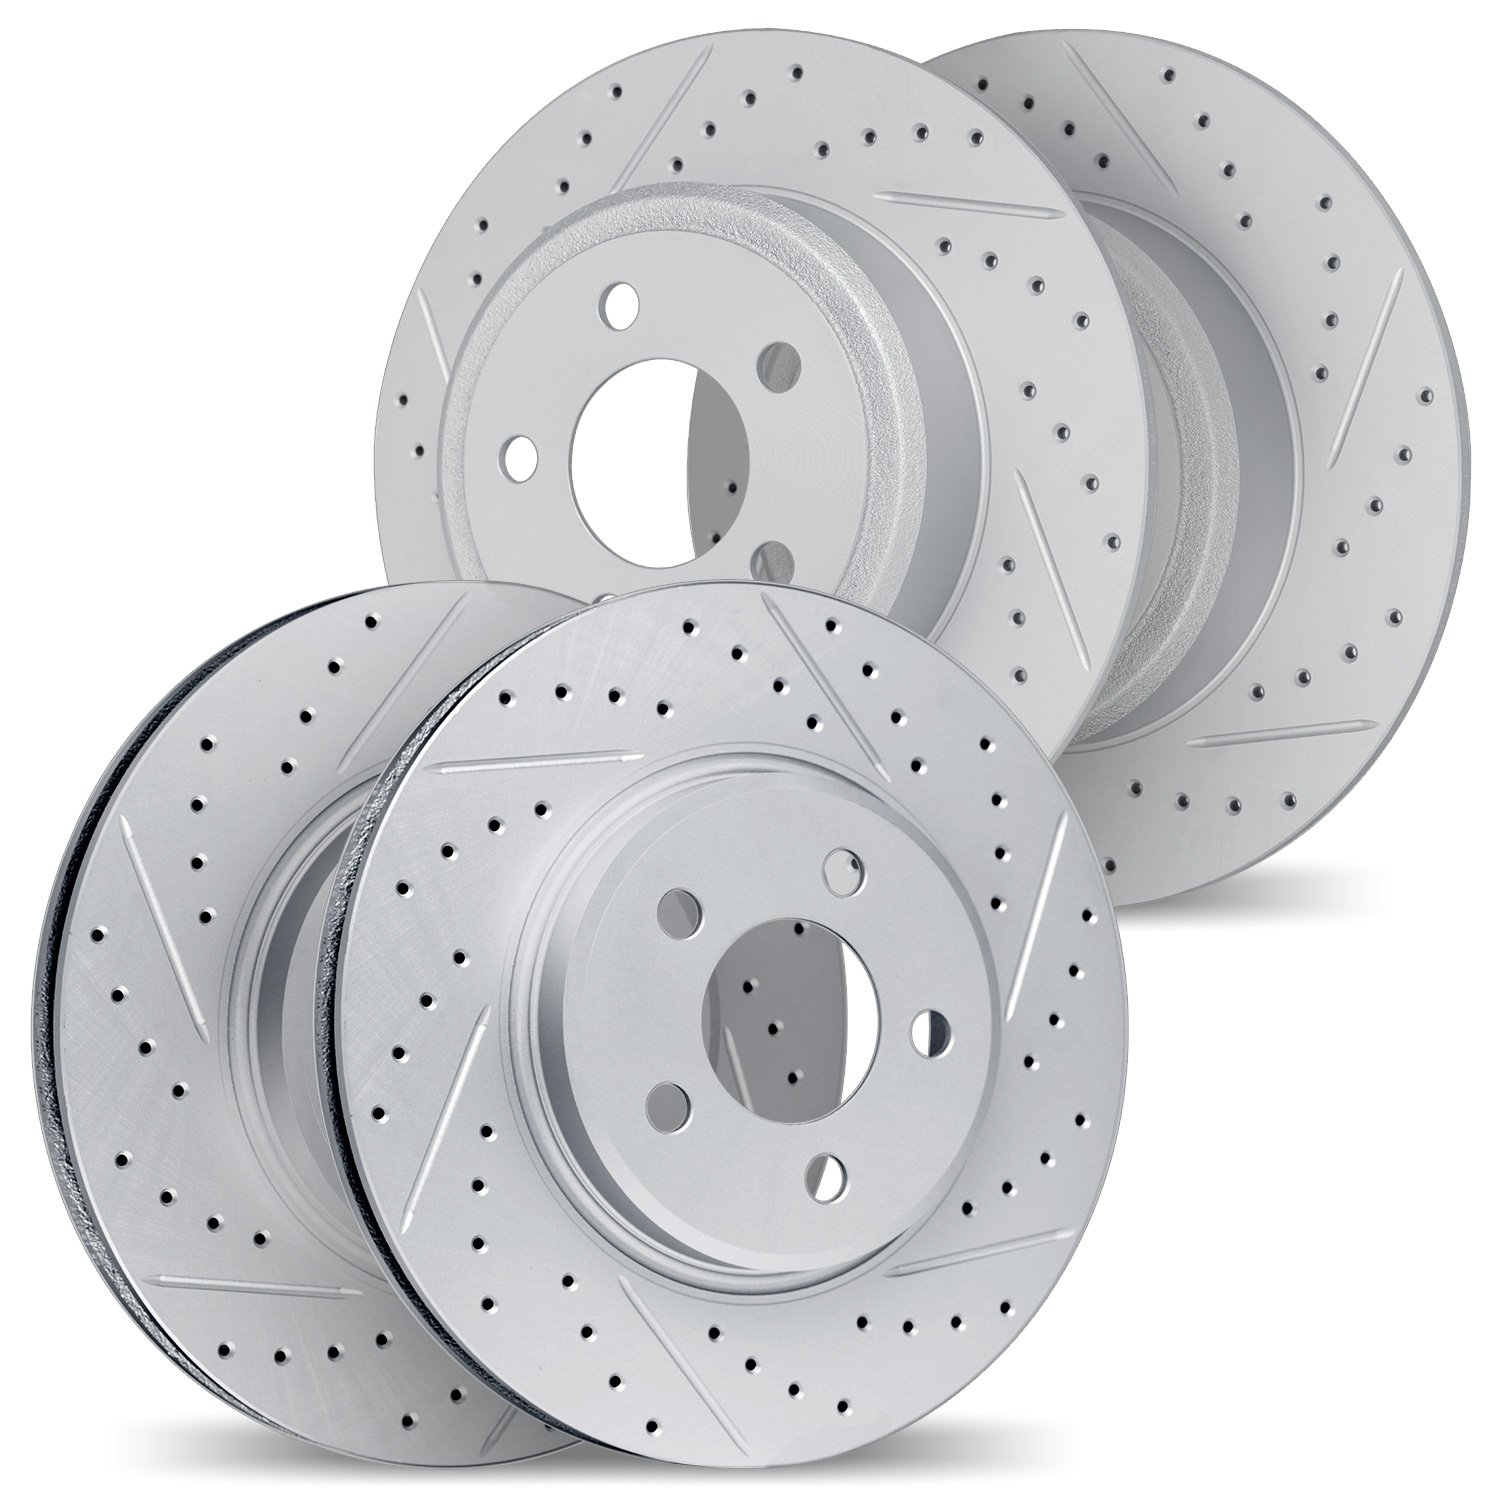 2004-73001 Geoperformance Drilled/Slotted Brake Rotors, 1996-2001 Audi/Volkswagen, Position: Front and Rear